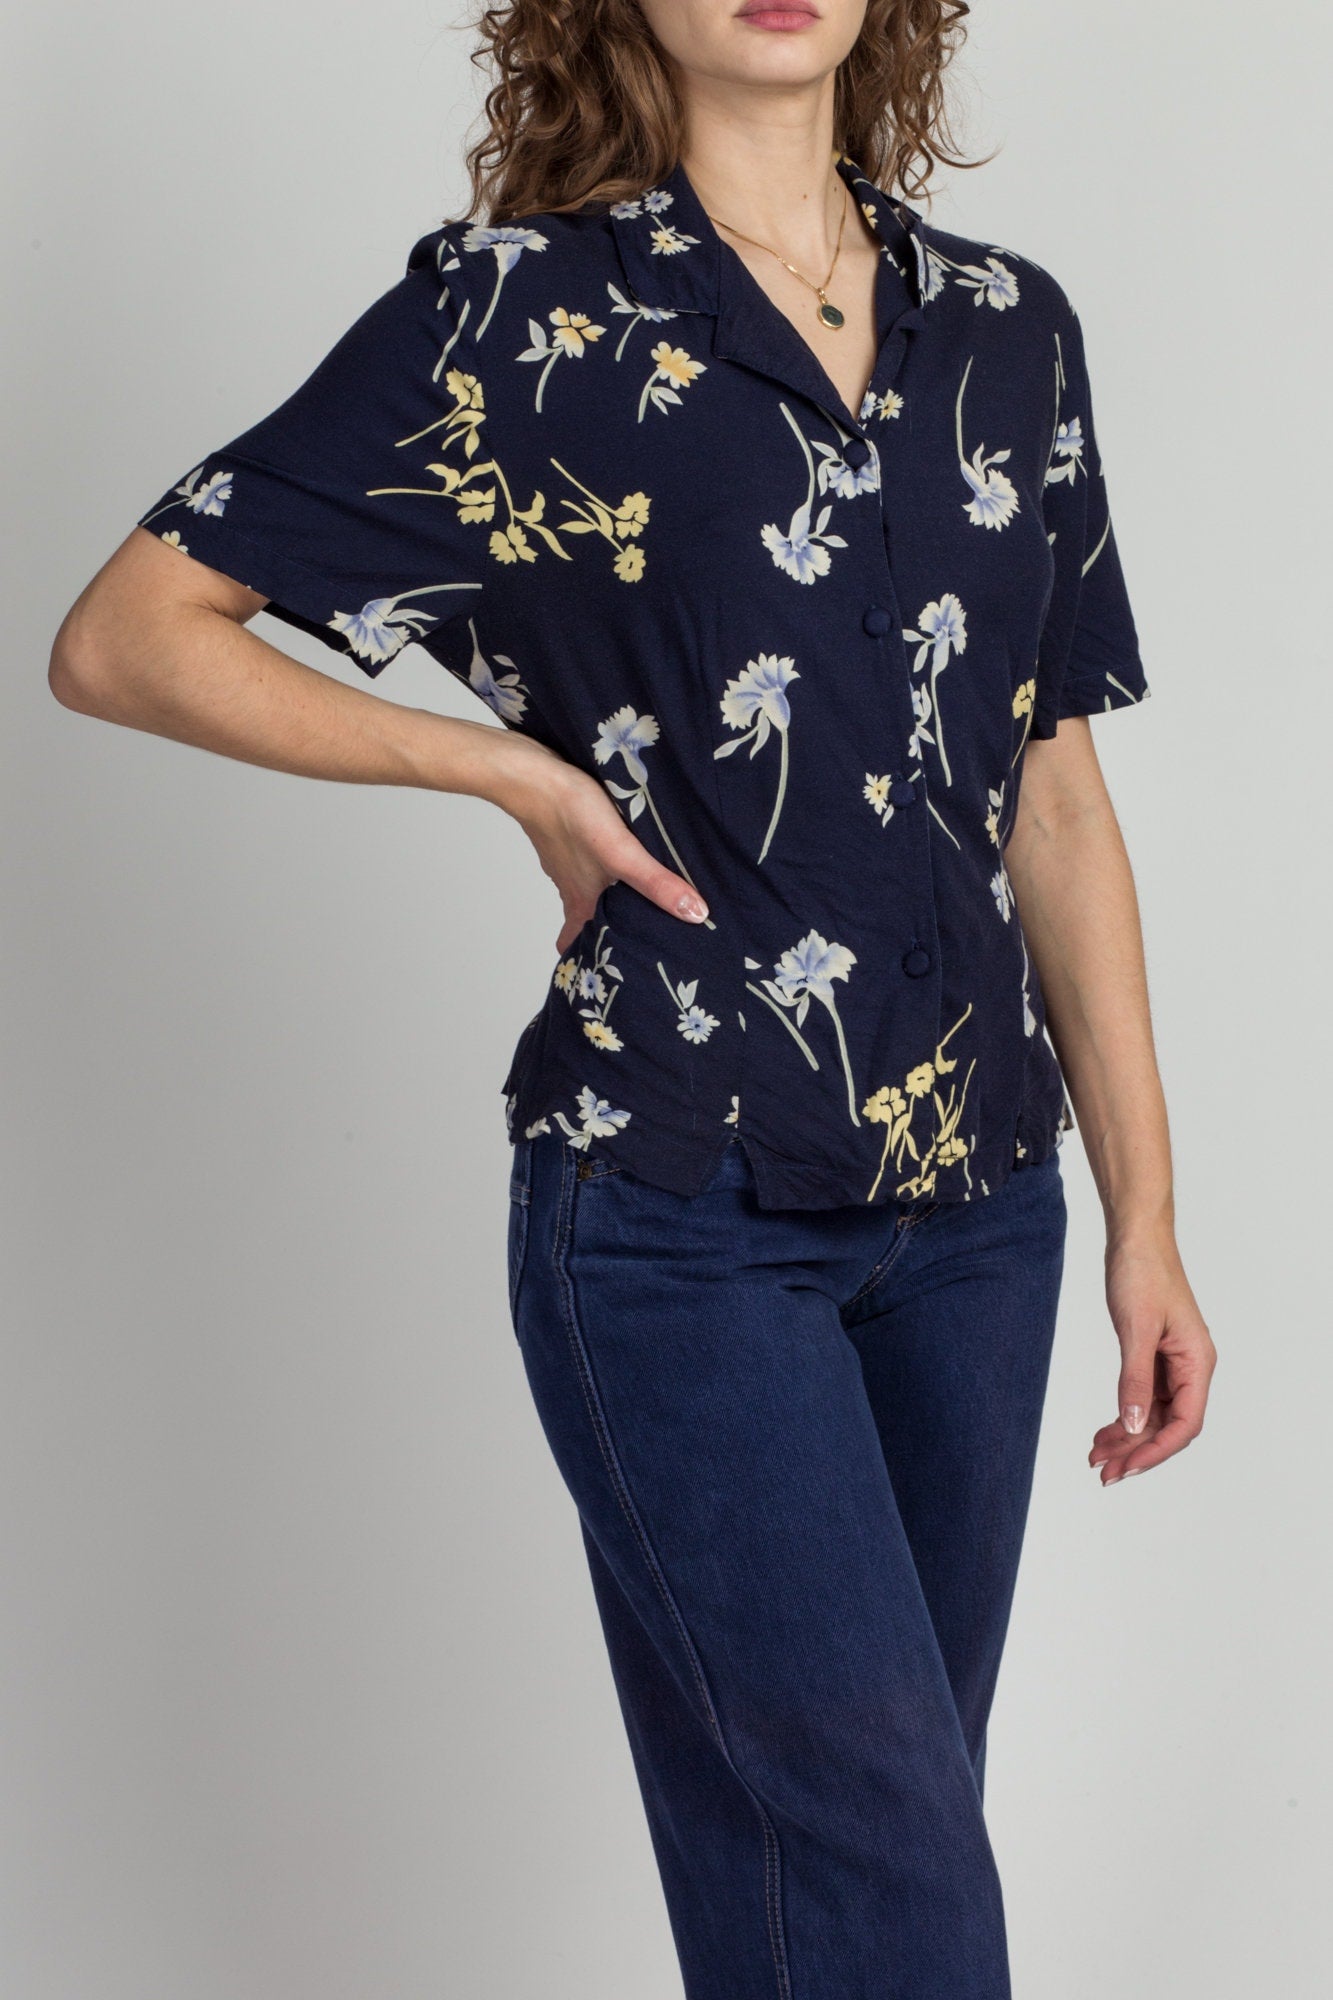 90s Navy Blue Floral Cinched Waist Blouse - Large 